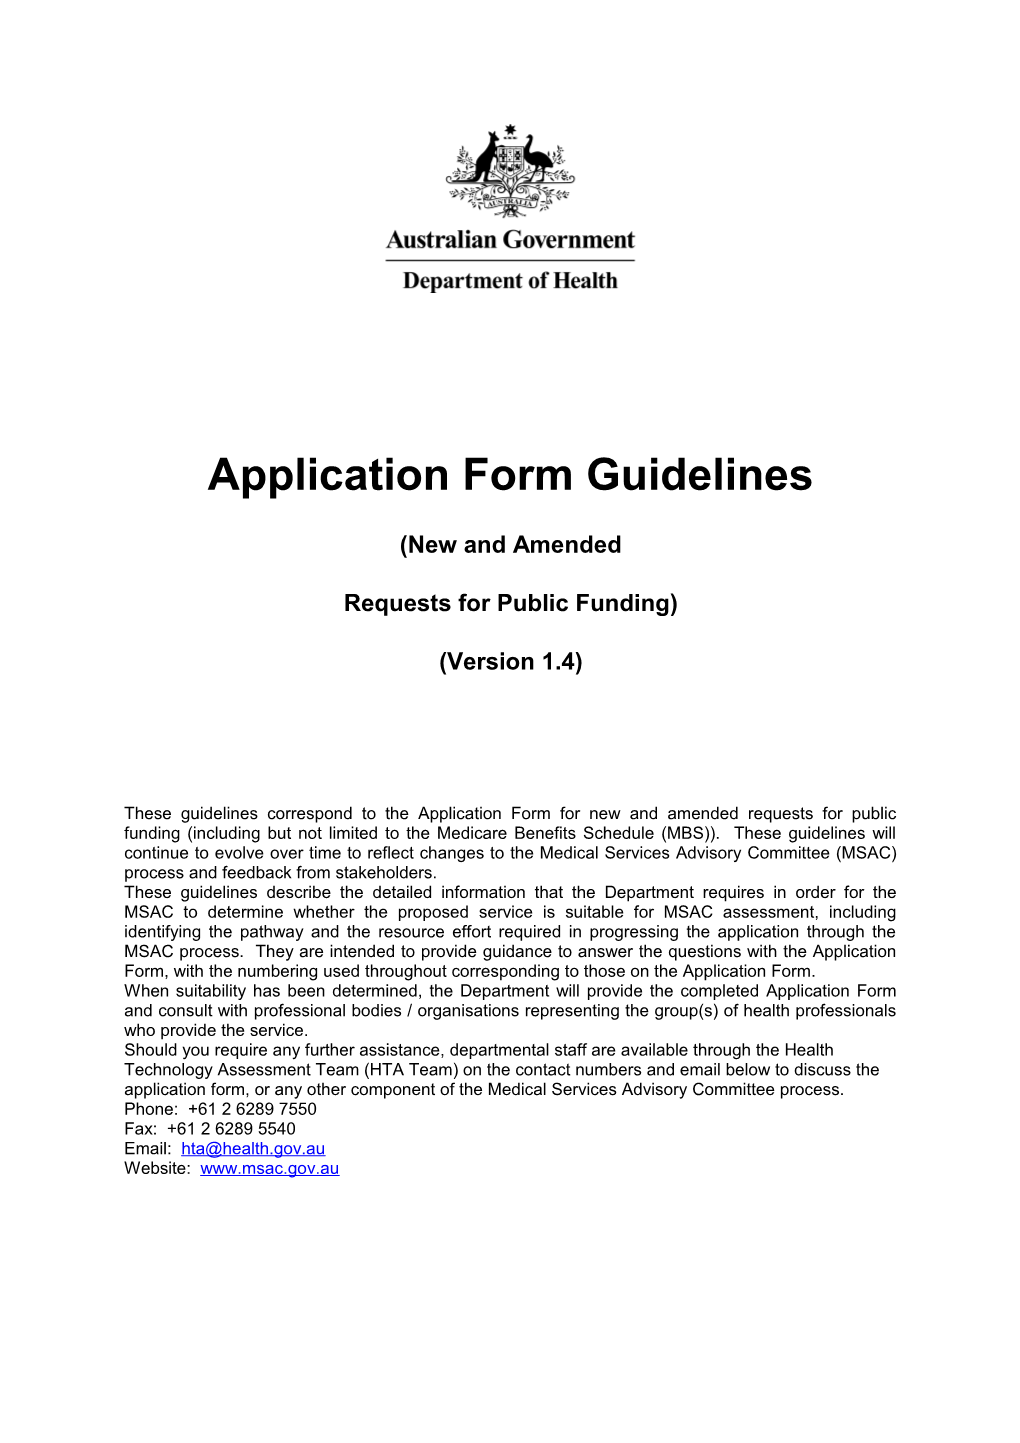 Application Form Guidelines s1